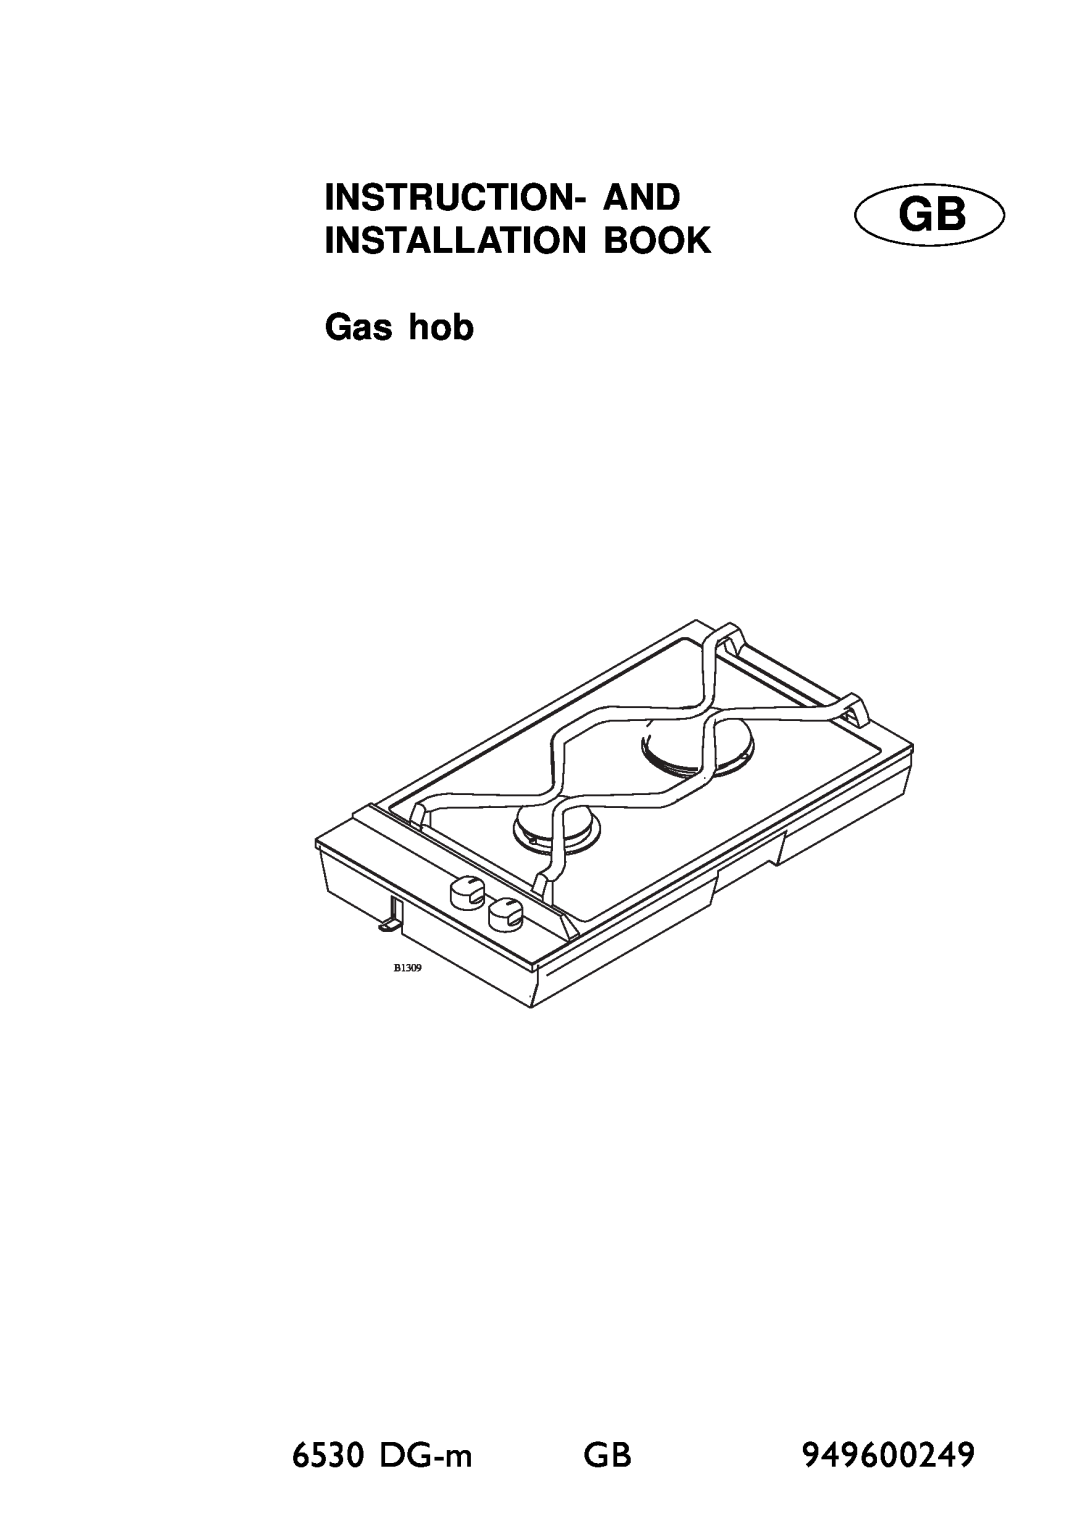 Electrolux manual INSTRUCTION- AND INSTALLATION BOOK Gas hob, DG-m 1 GB, 949600249 